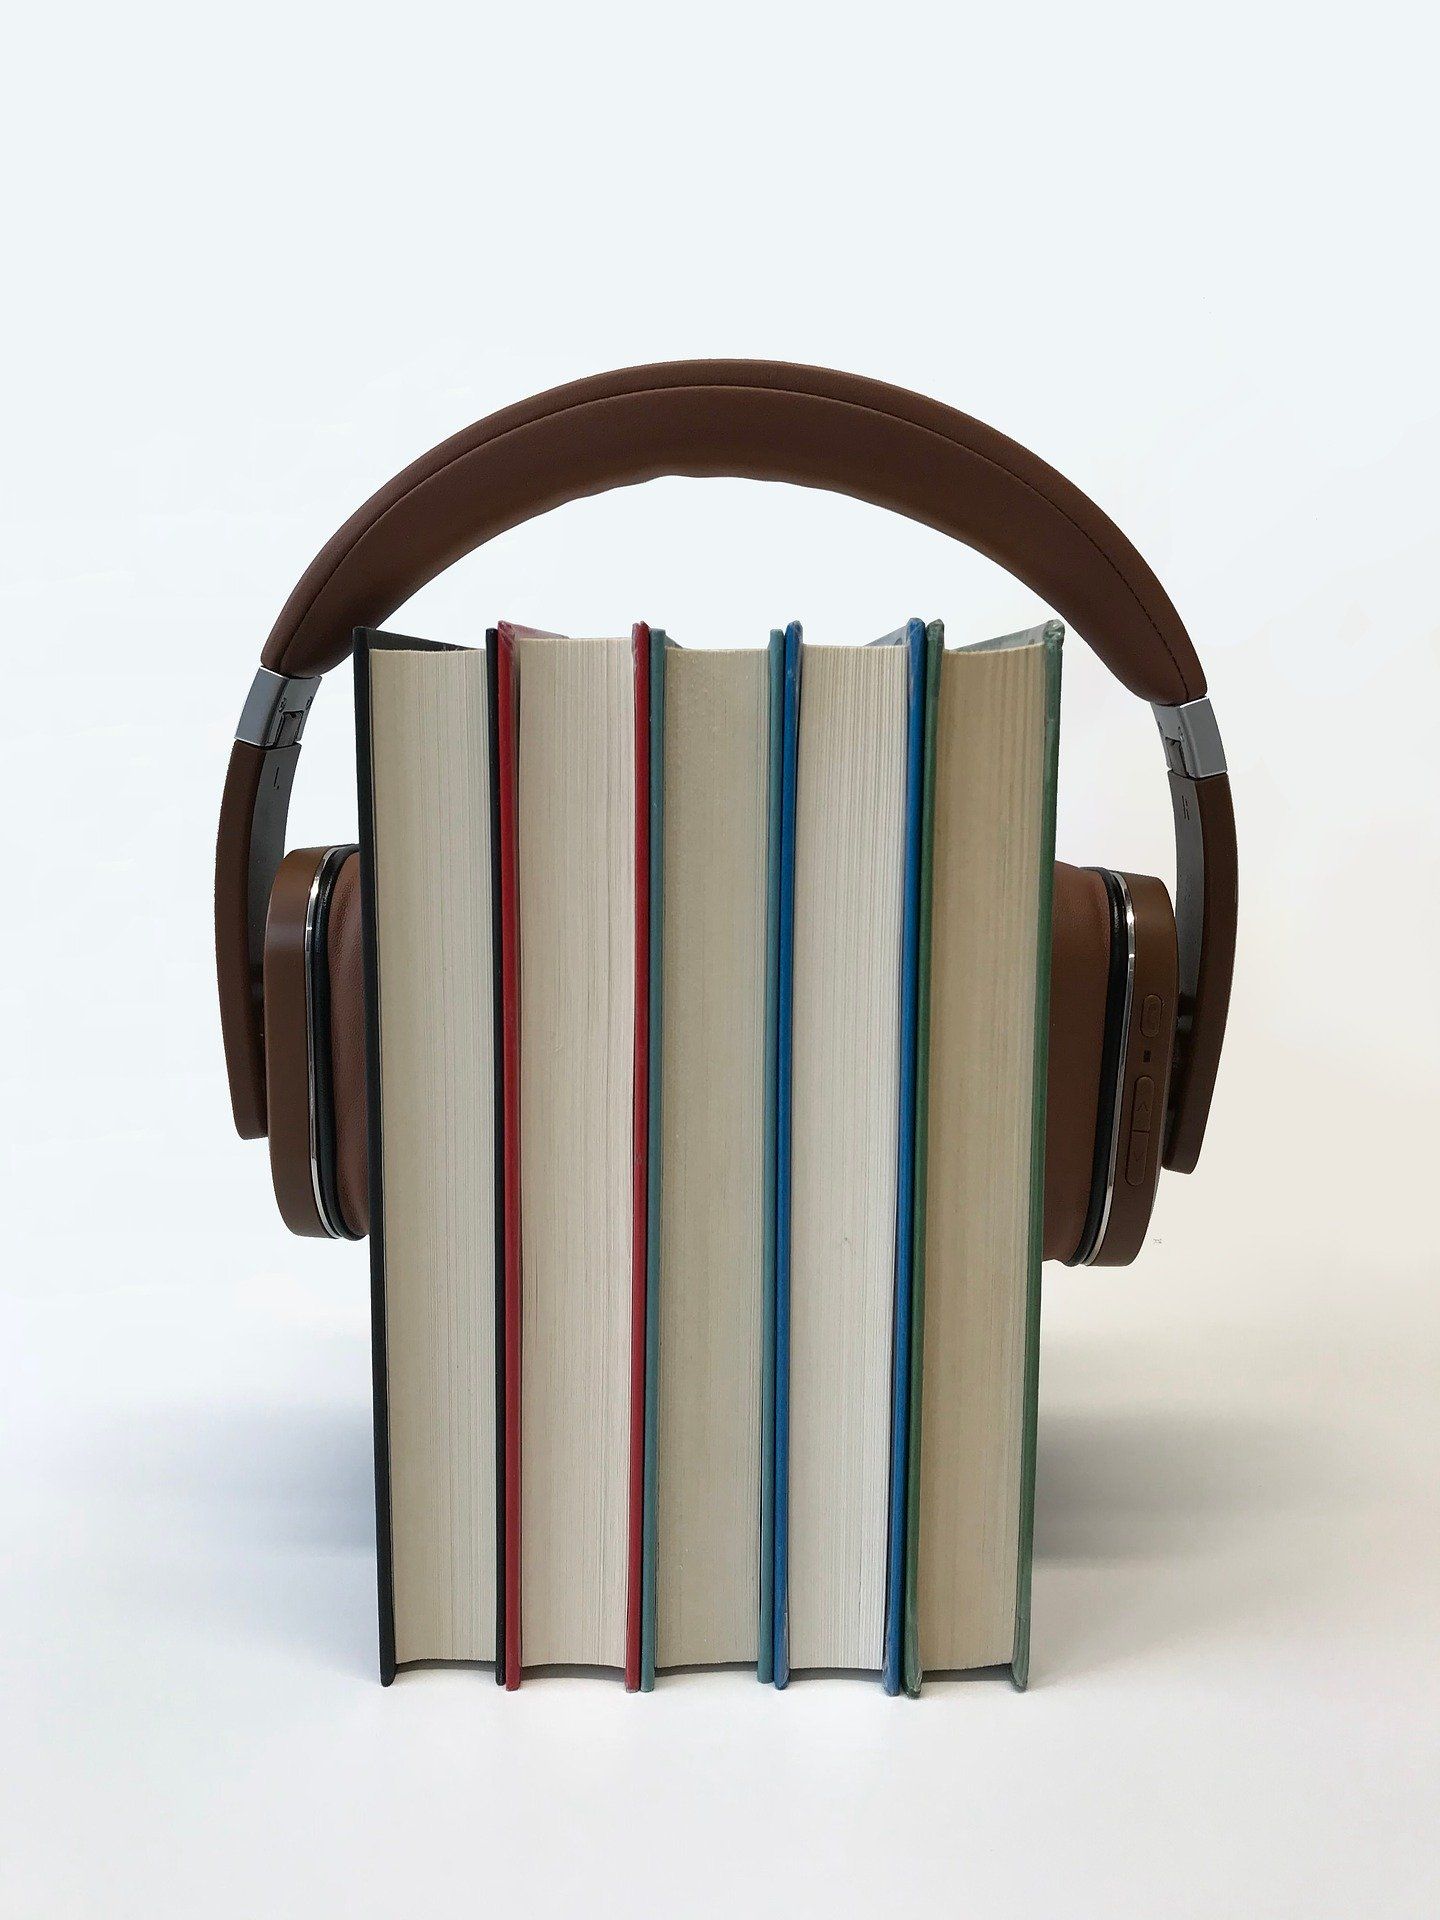 Books with a pair of headphones on them